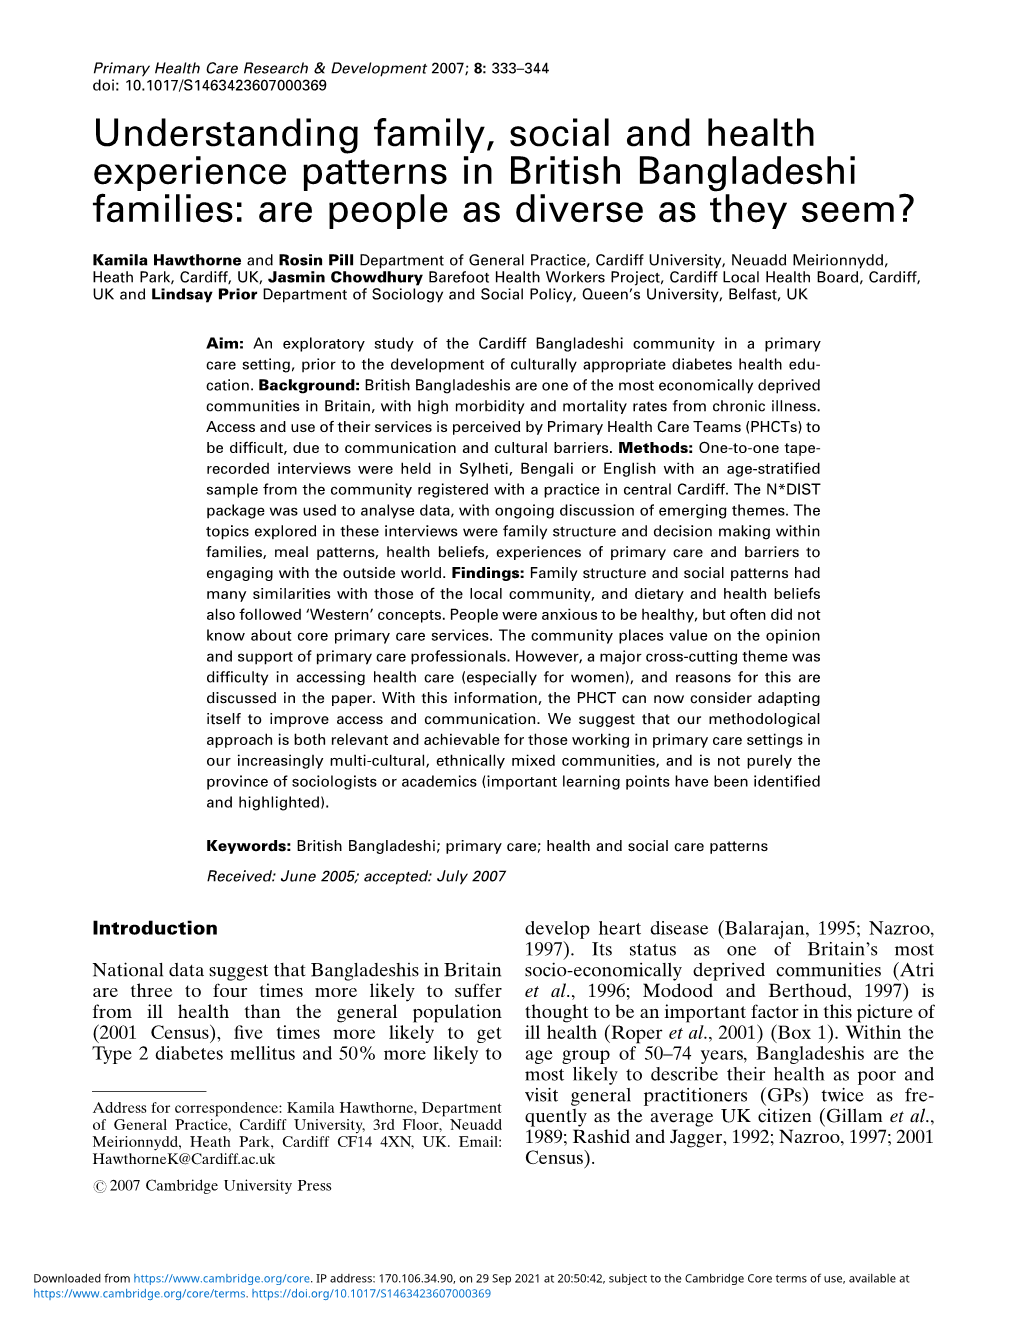 Understanding Family, Social and Health Experience Patterns in British Bangladeshi Families: Are People As Diverse As They Seem?